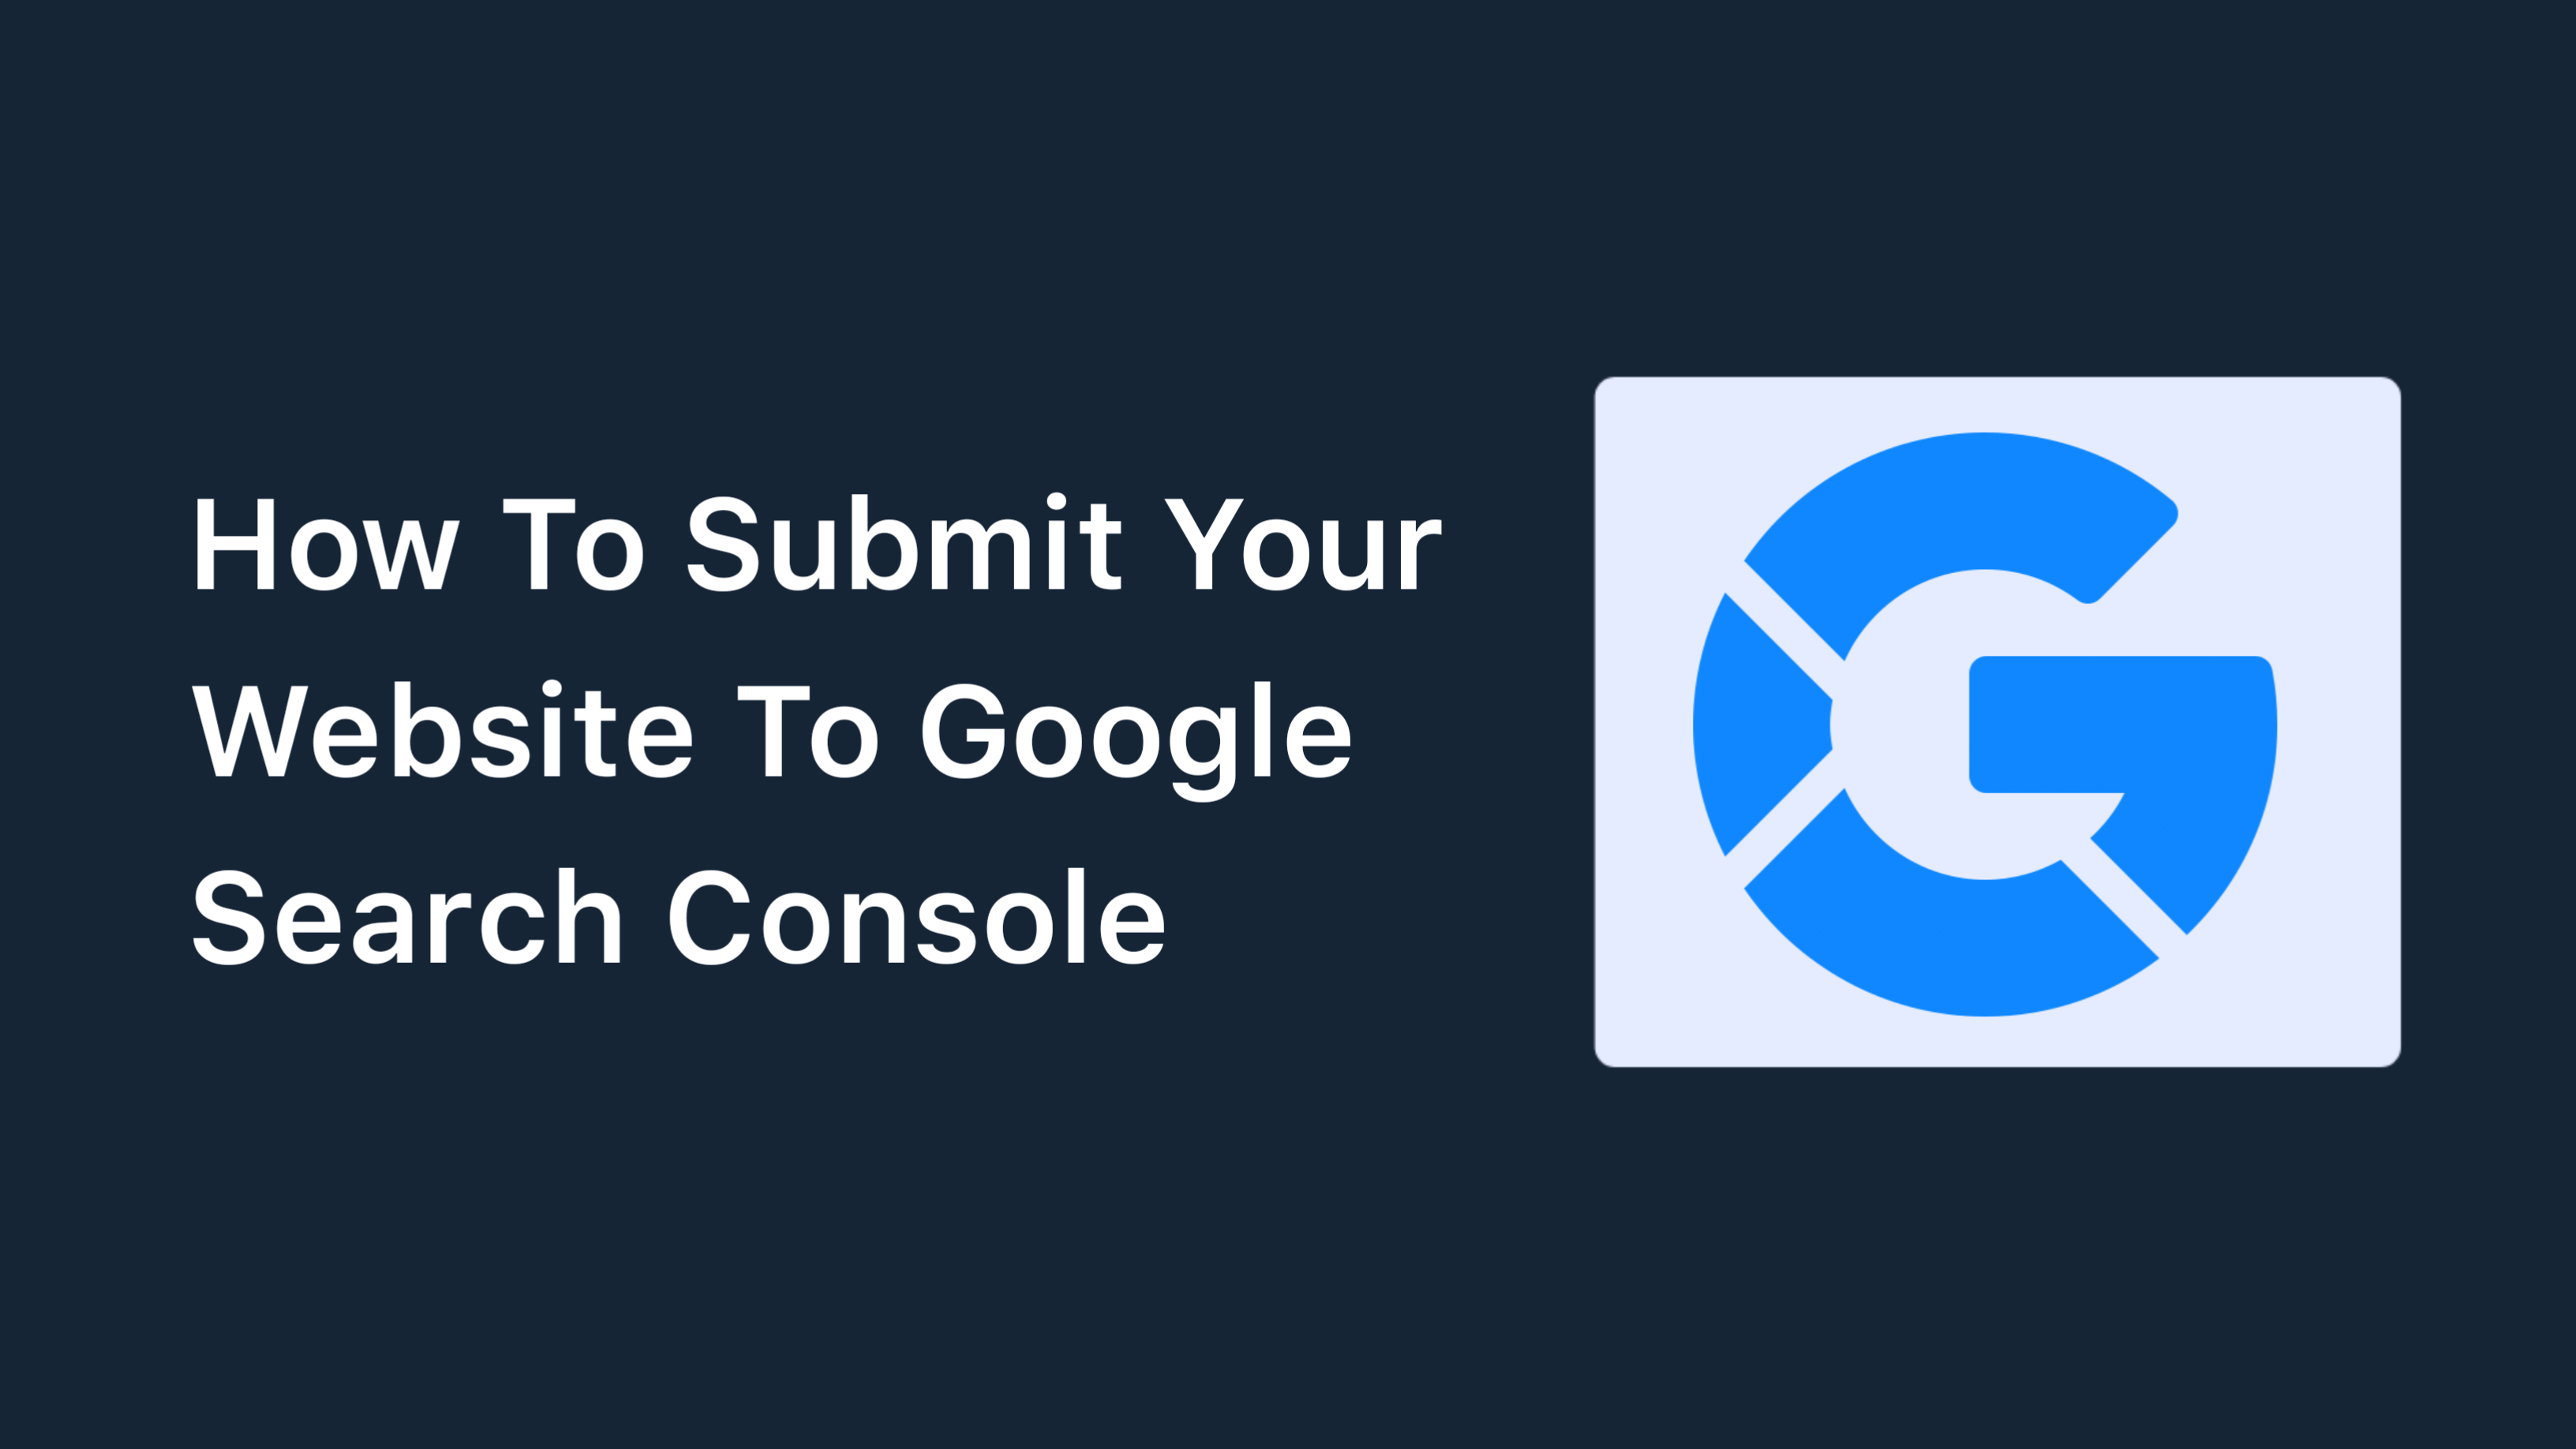 How To Submit Your Website To Google Search Console